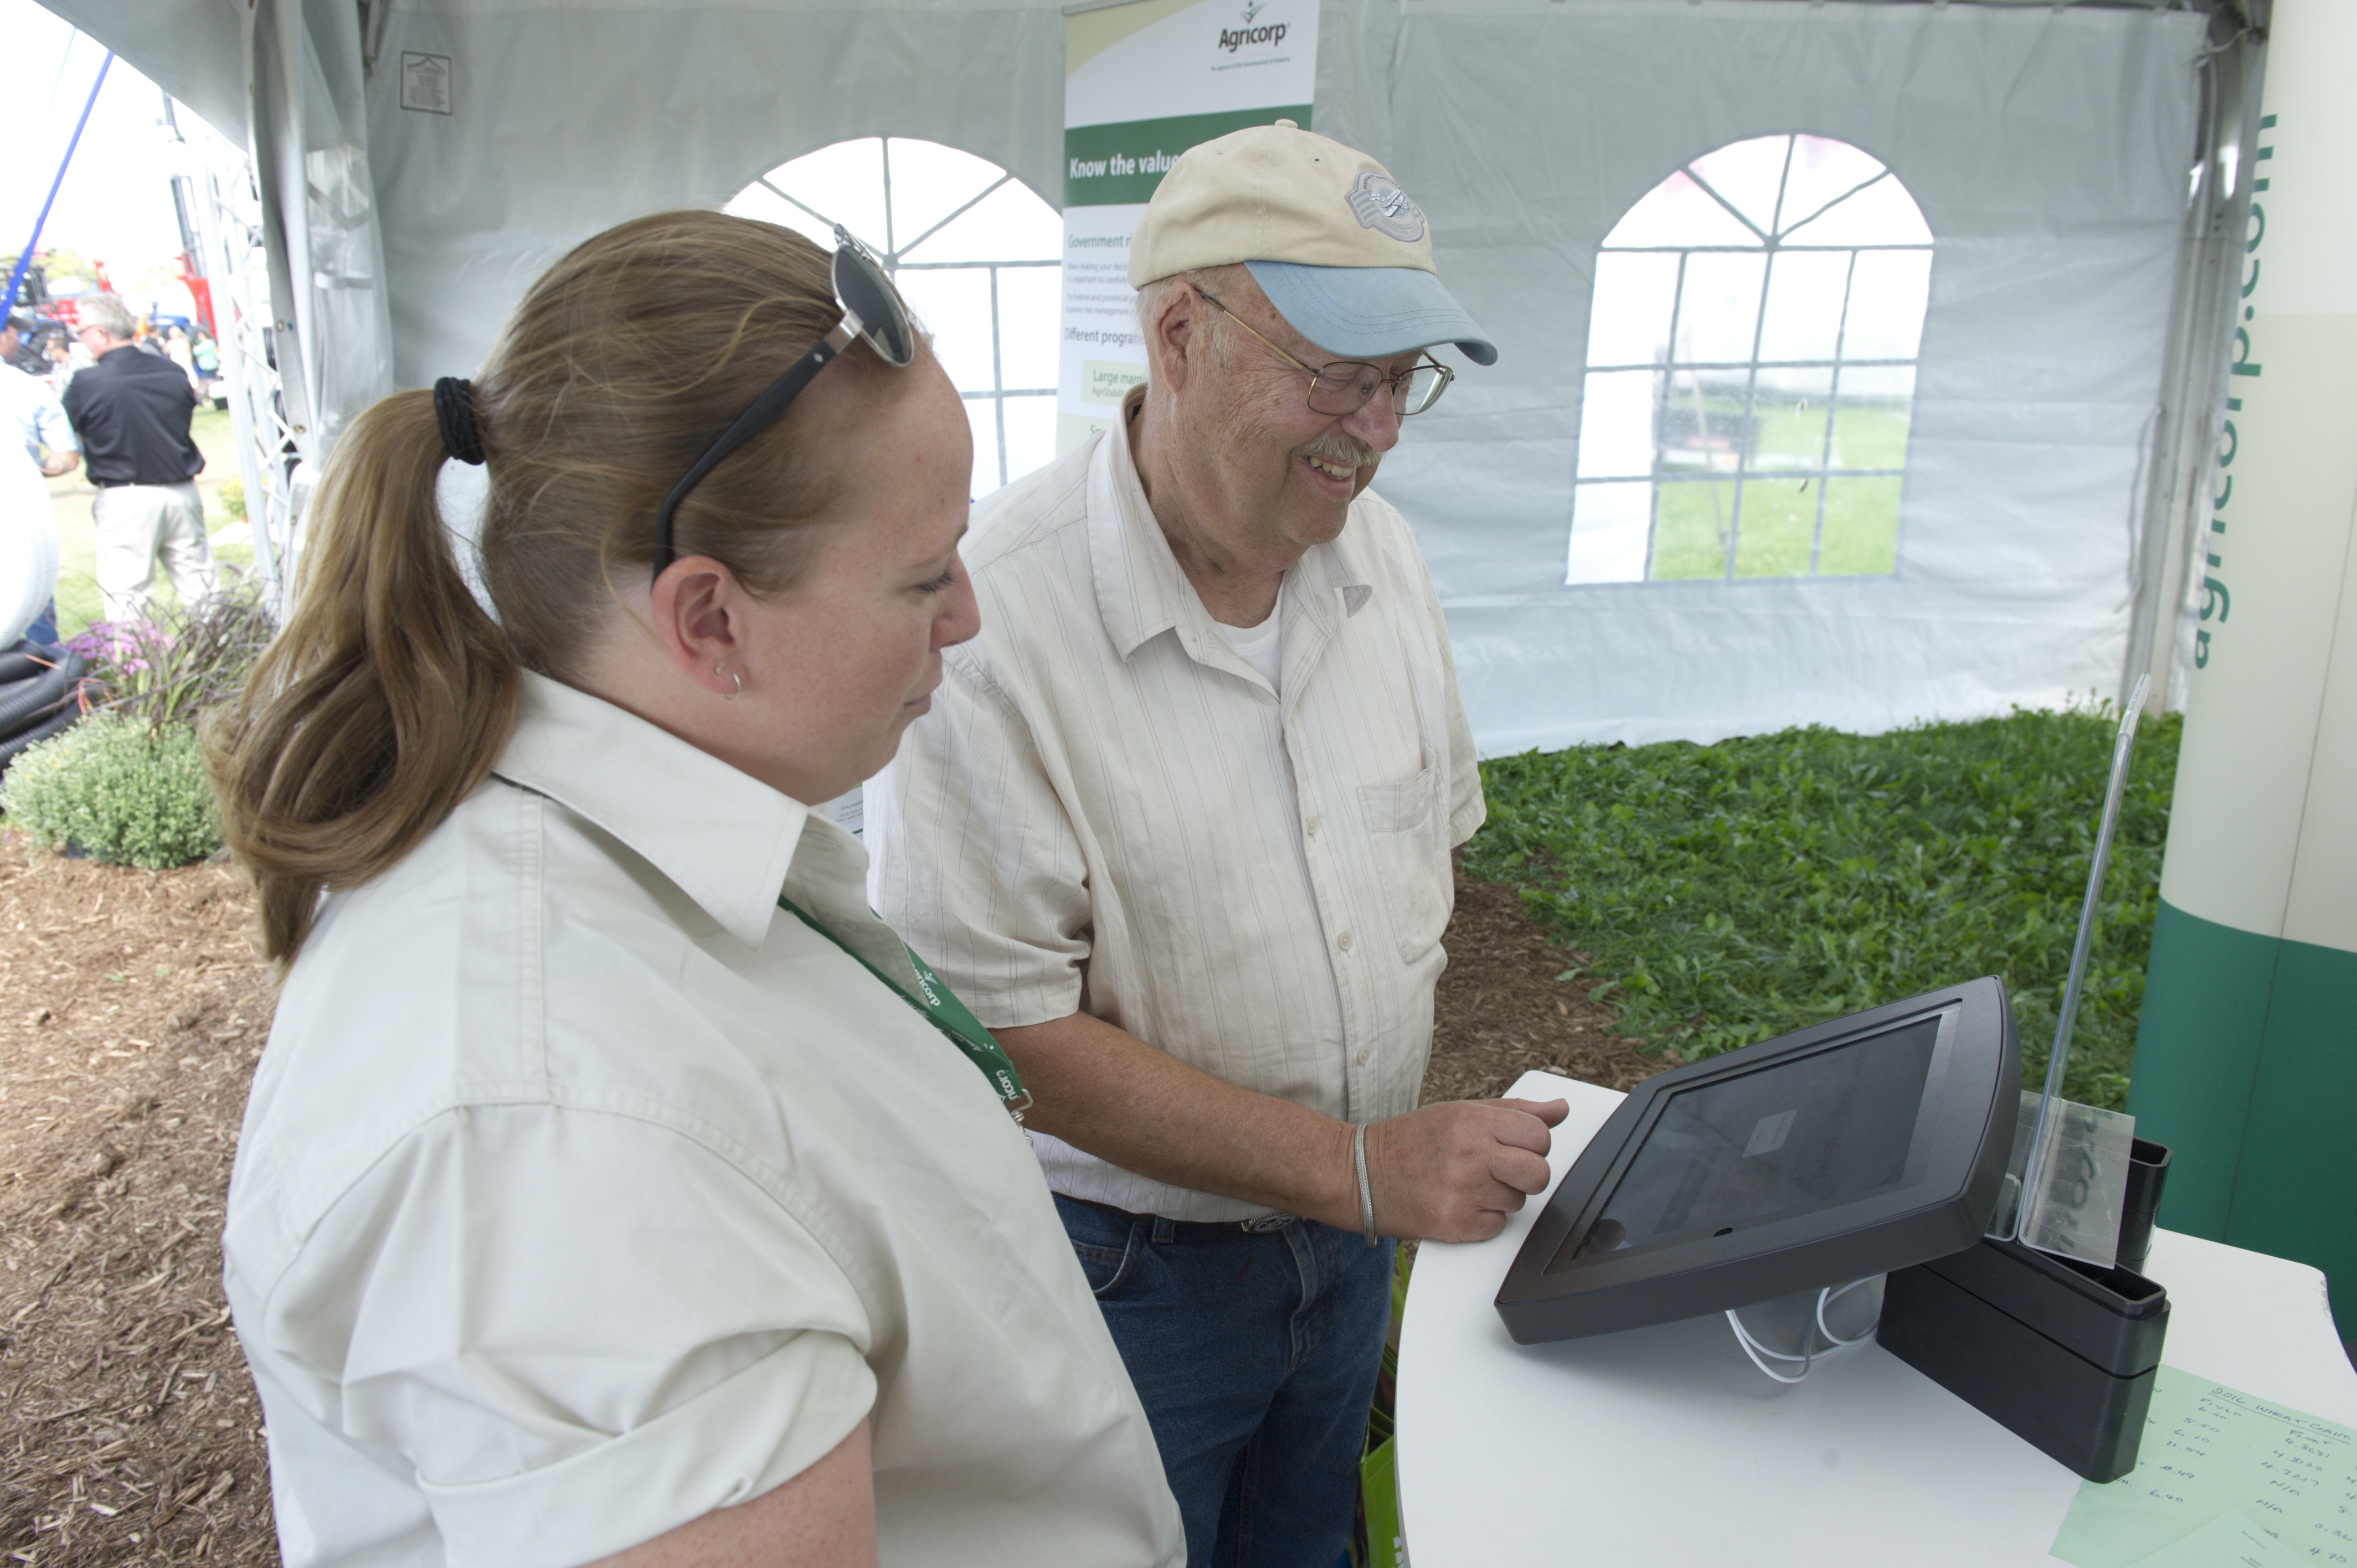 An Agricorp staff member helps a producer use a kiosk to access information at a farm show.